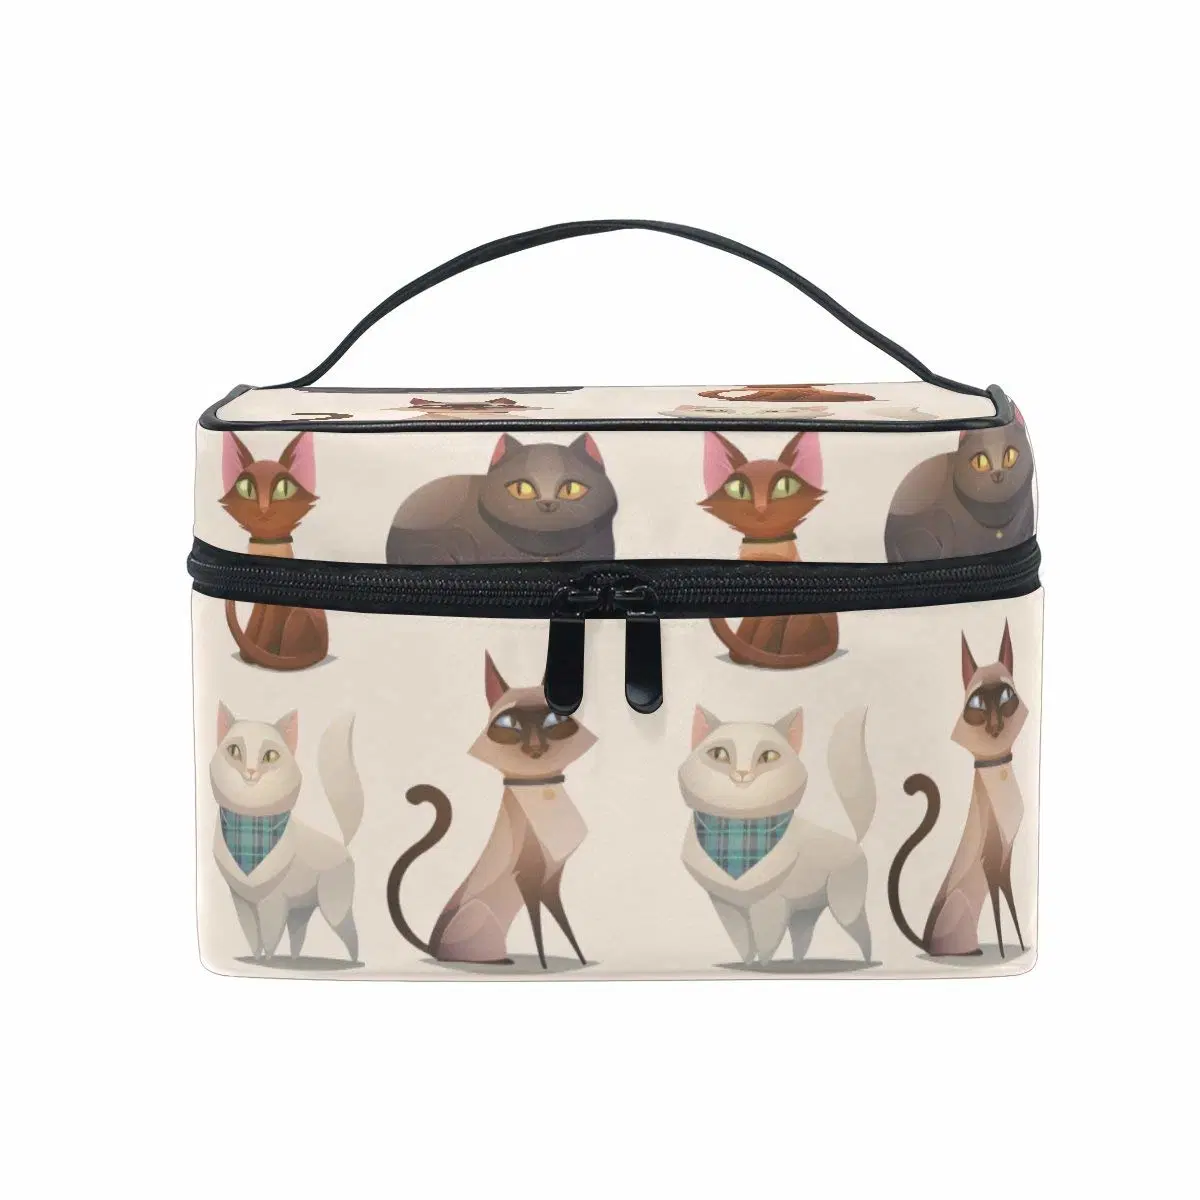 Travel Makeup Bags Four Cartoon Cat Cosmetic Bags Organizer Train Case Toiletry Make up Pouch Multicolor